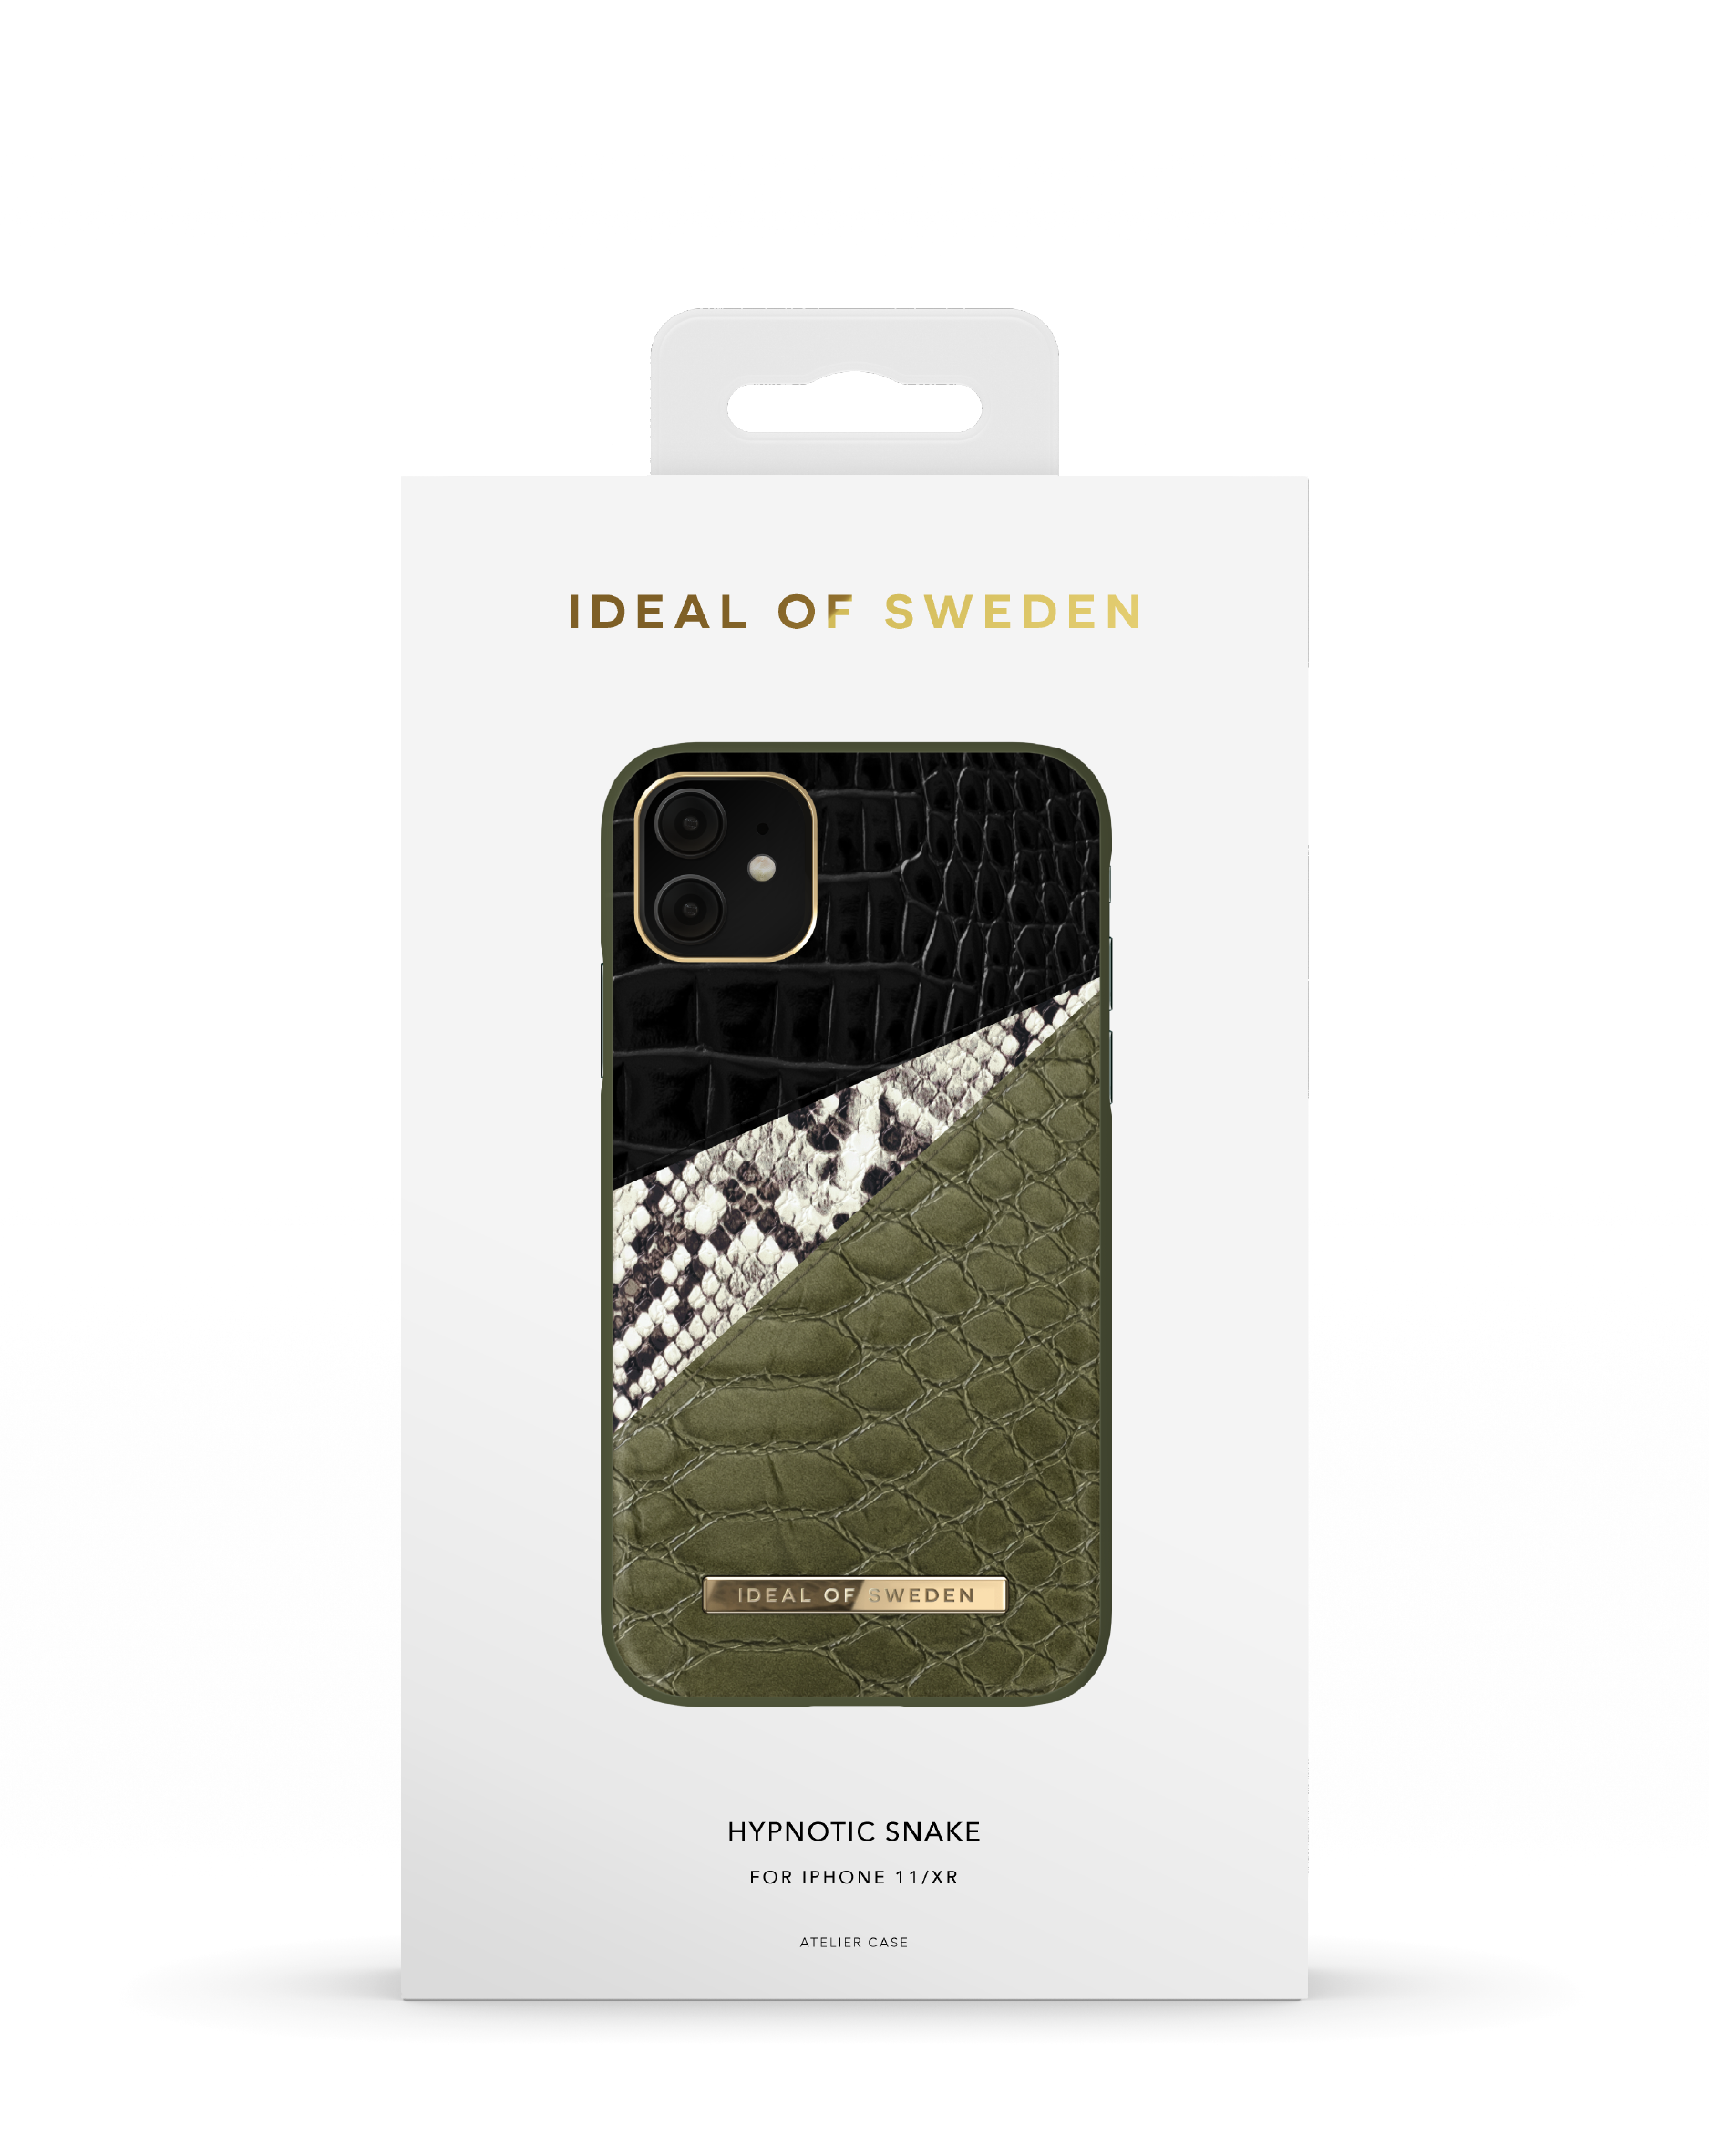 iPhone SWEDEN OF XR, Backcover, IDEAL Snake 11, iPhone Hypnotic Apple, IDACAW20-1961-224,